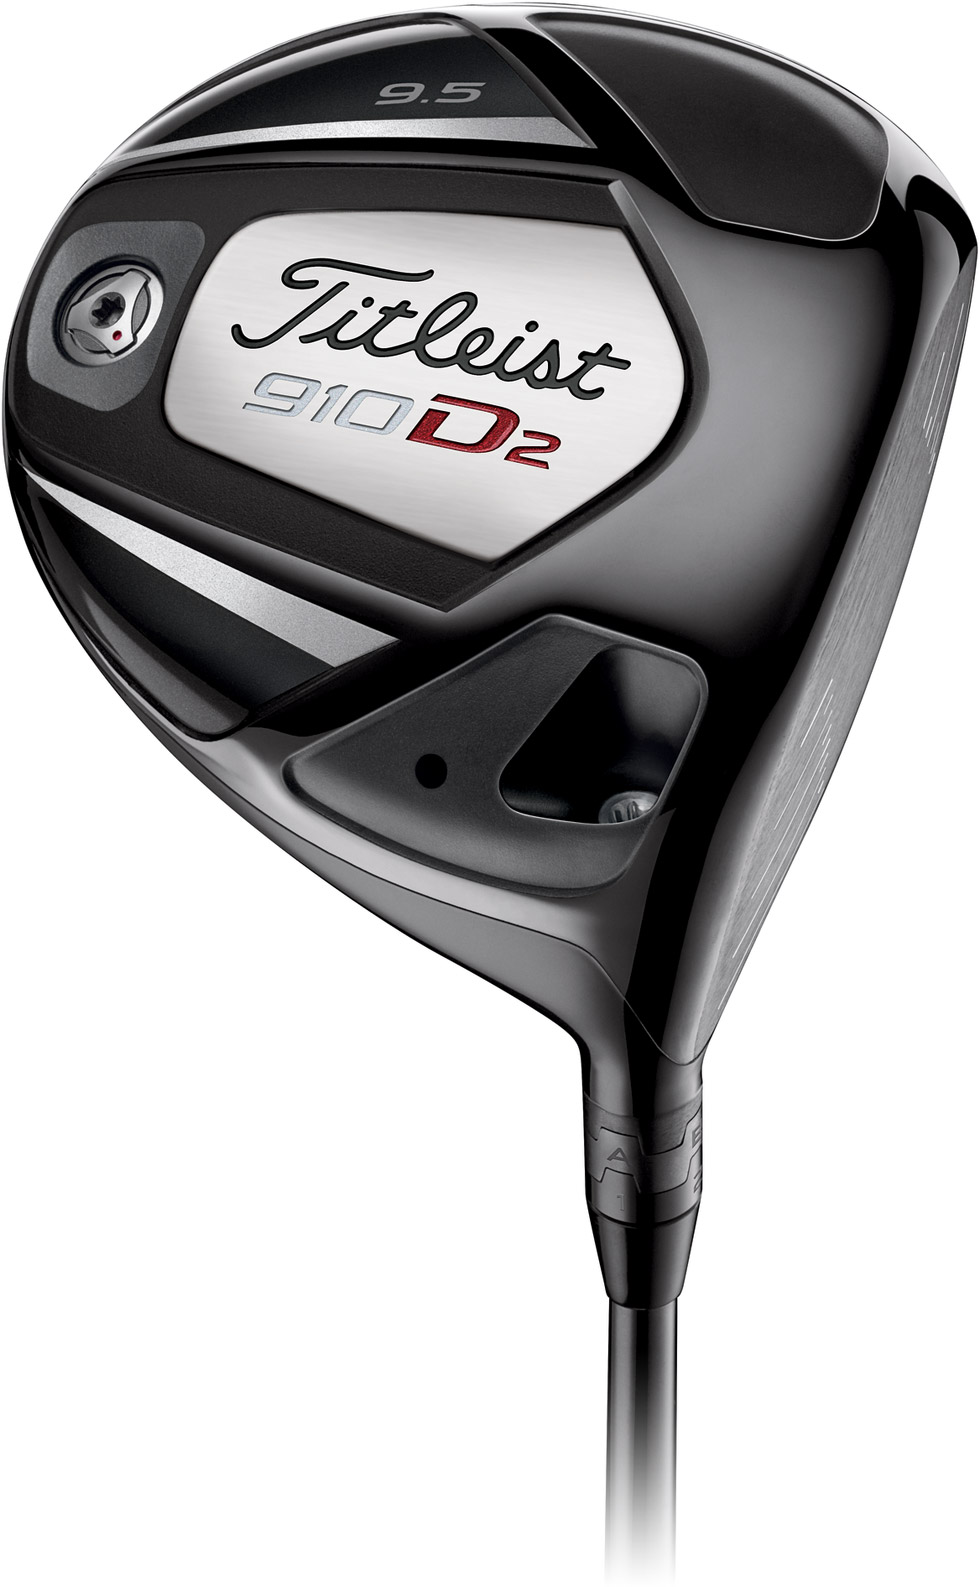 Titleist Introduces 910 Drivers - First Adjustable Models from Titleist